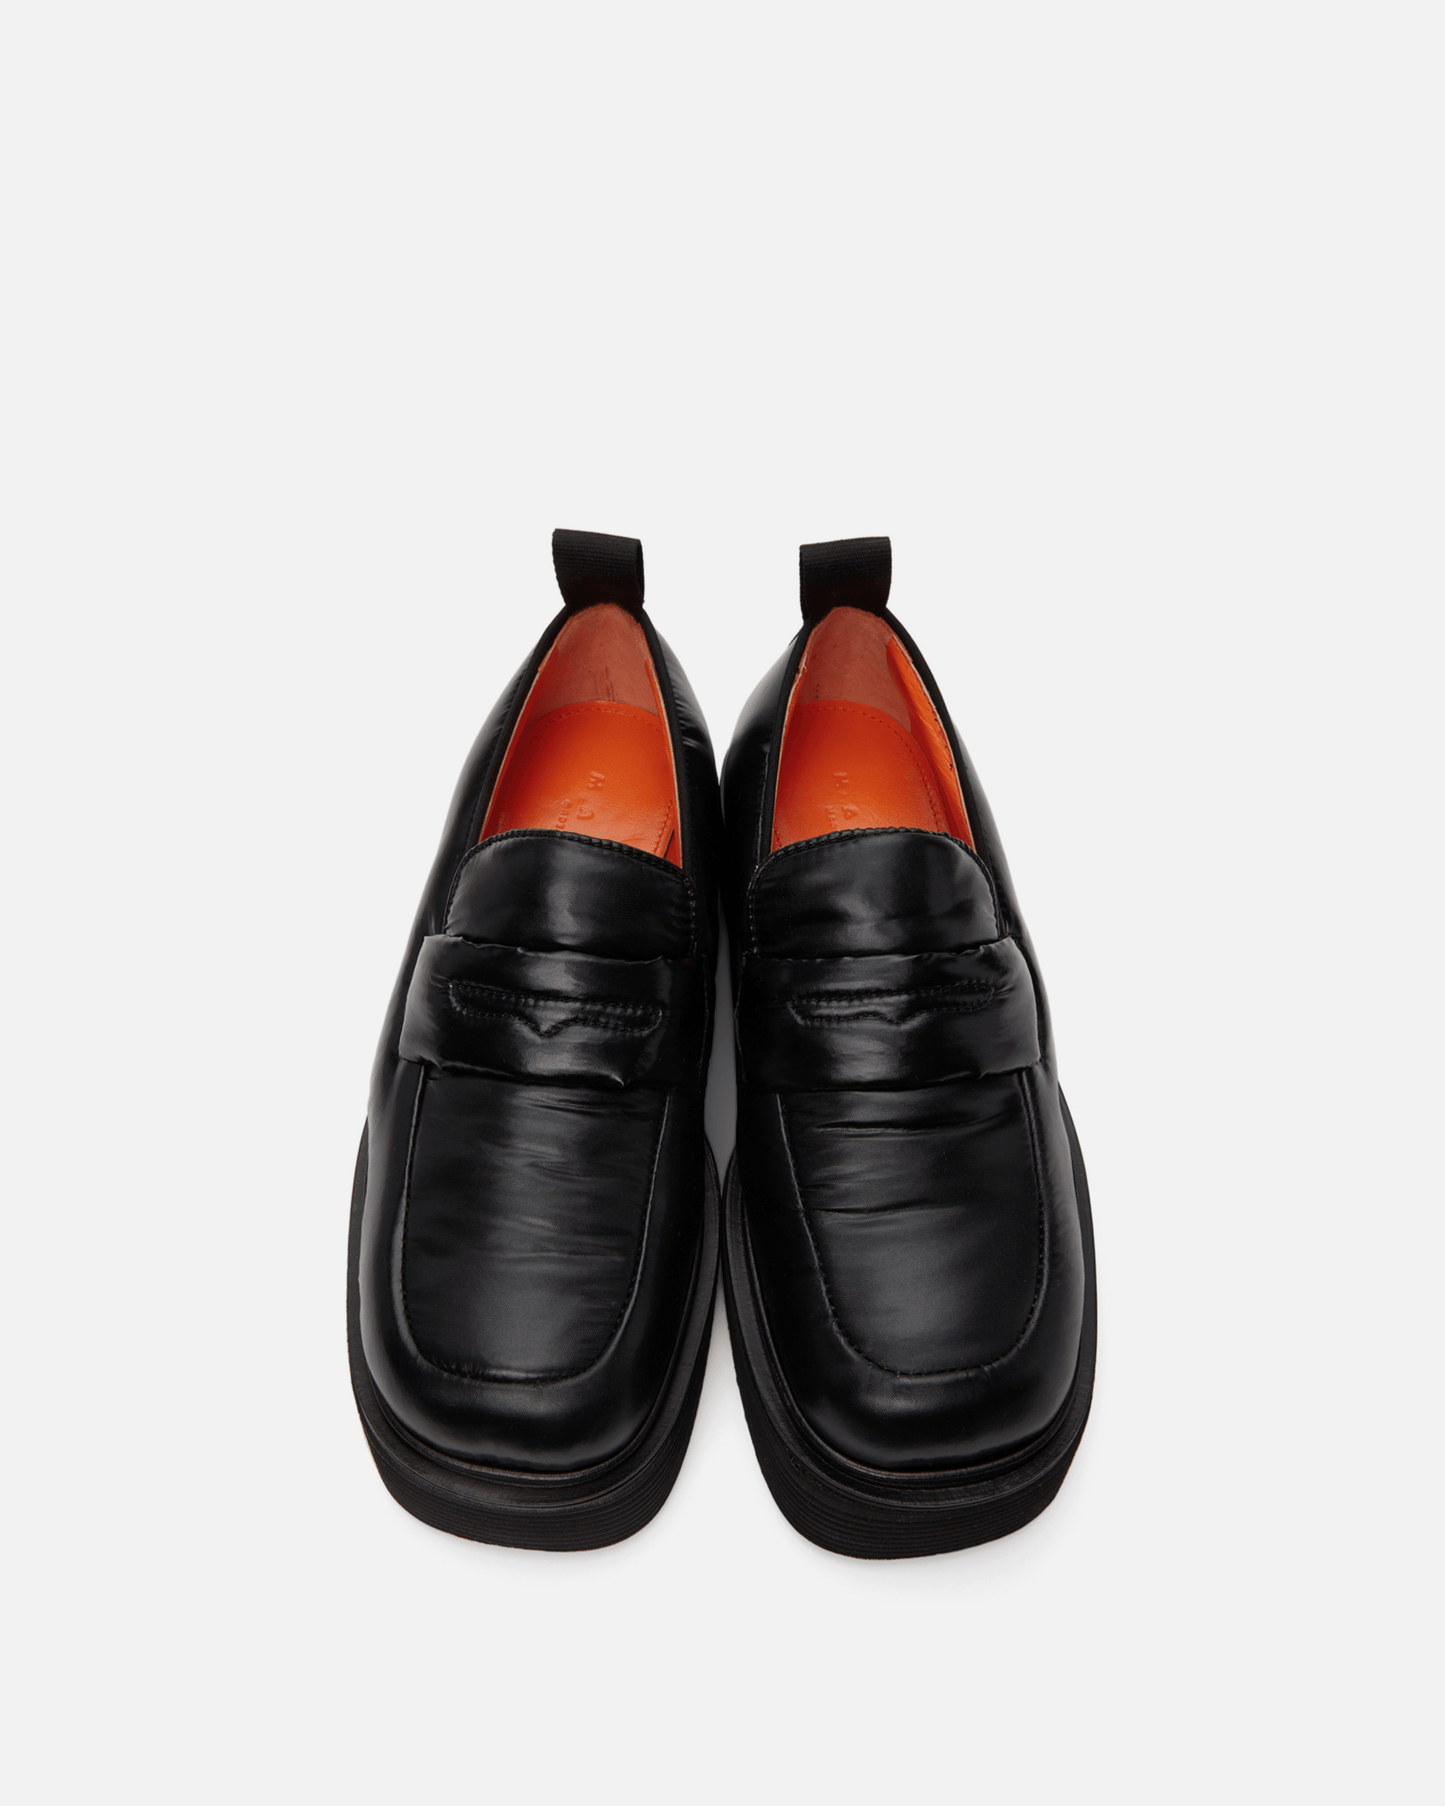 Marni Men's Shoes Padded Square Toe Loafer in Black